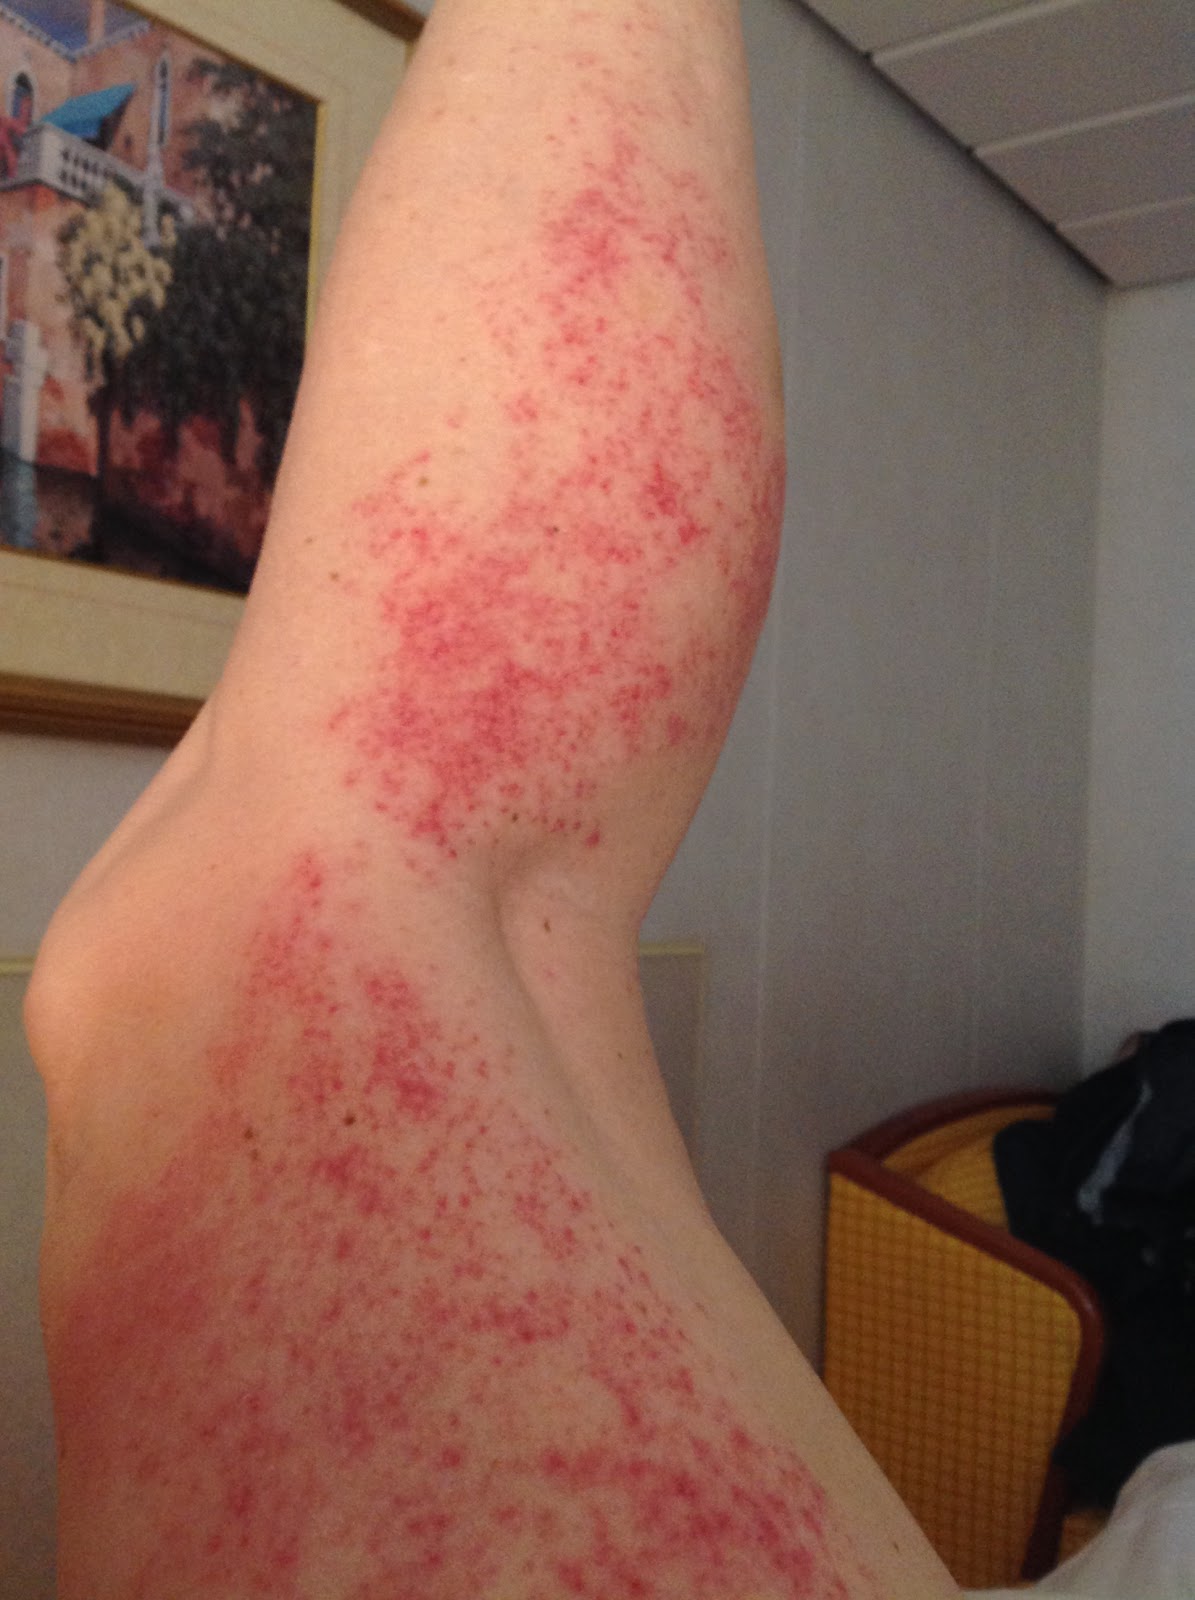 Woman's leg with a bright red rash.